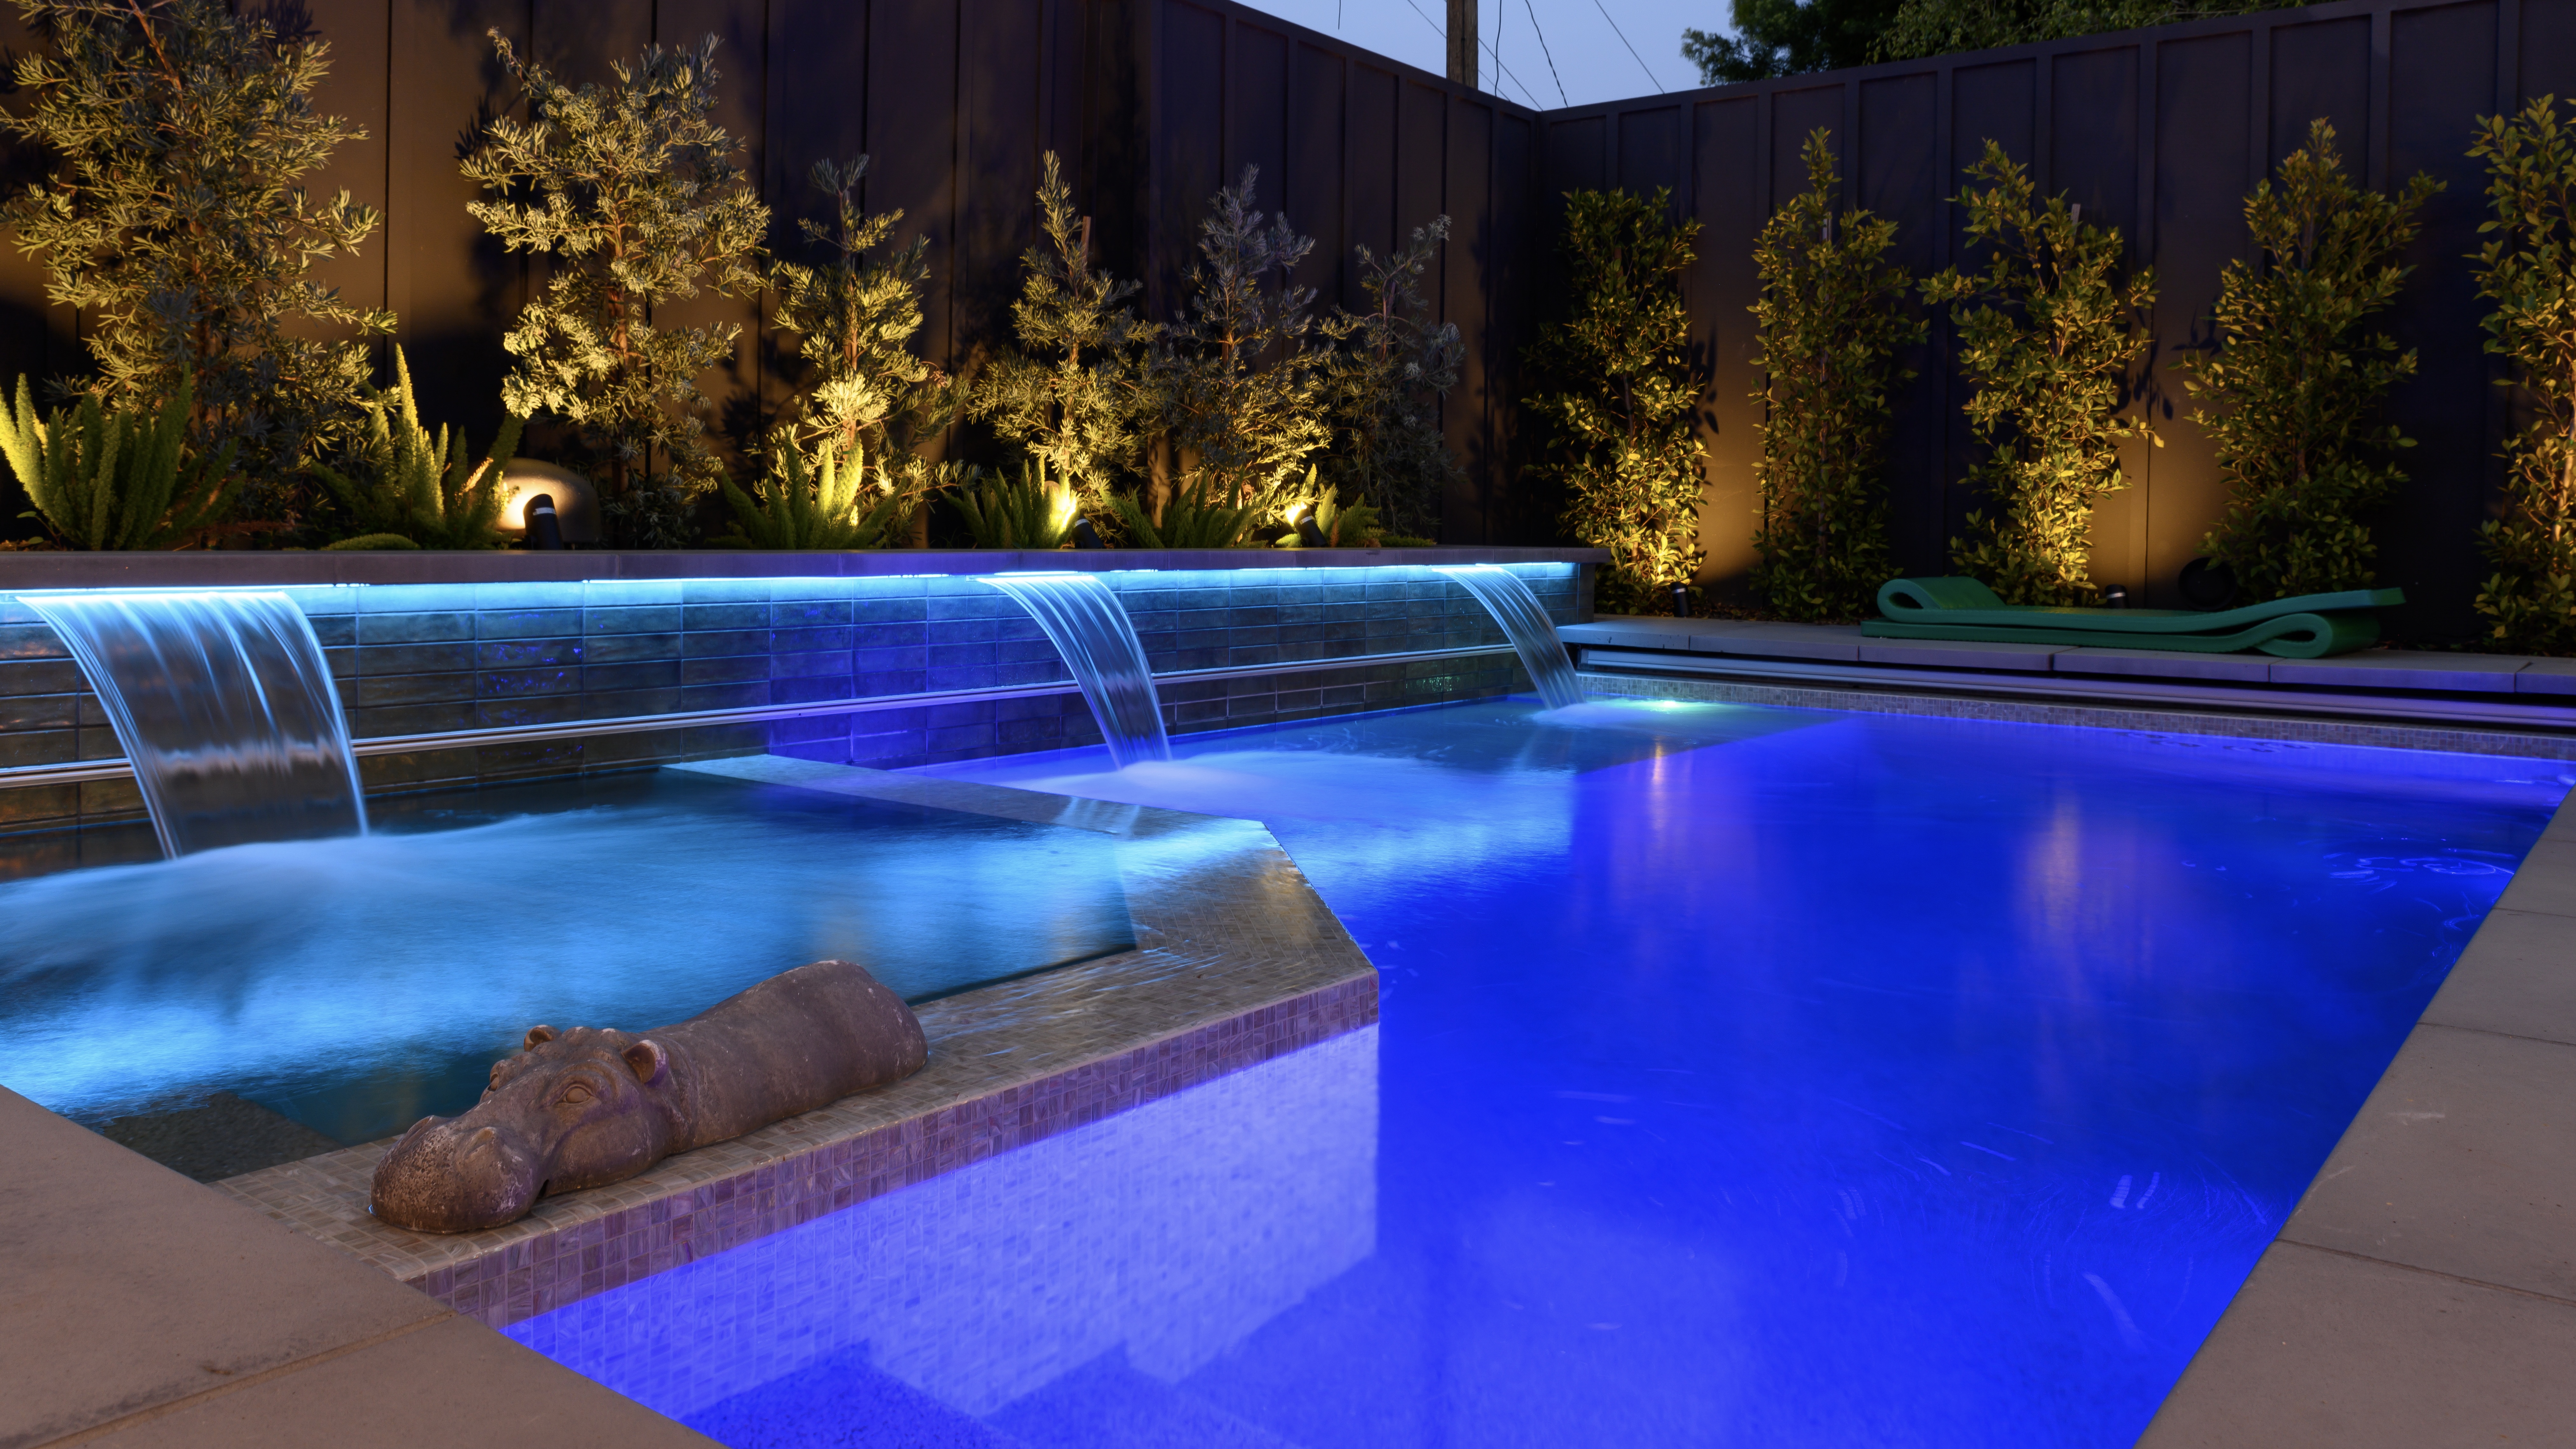 Proluxe Linear Lighting complementing with the pool's aesthetic perfeclty